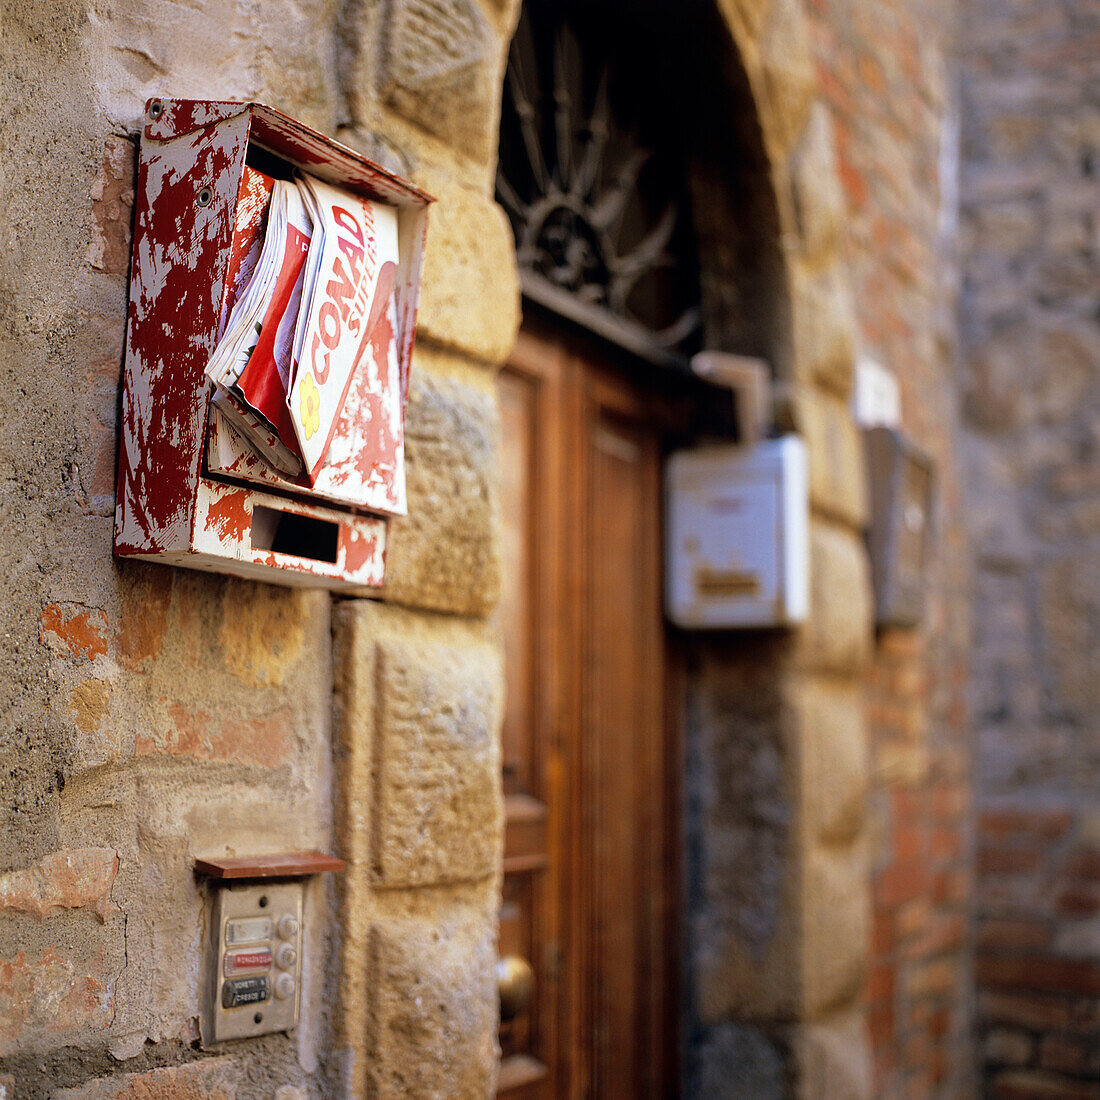 Prospectus in a letterbox, Montepulciano, Tuscany, Italy